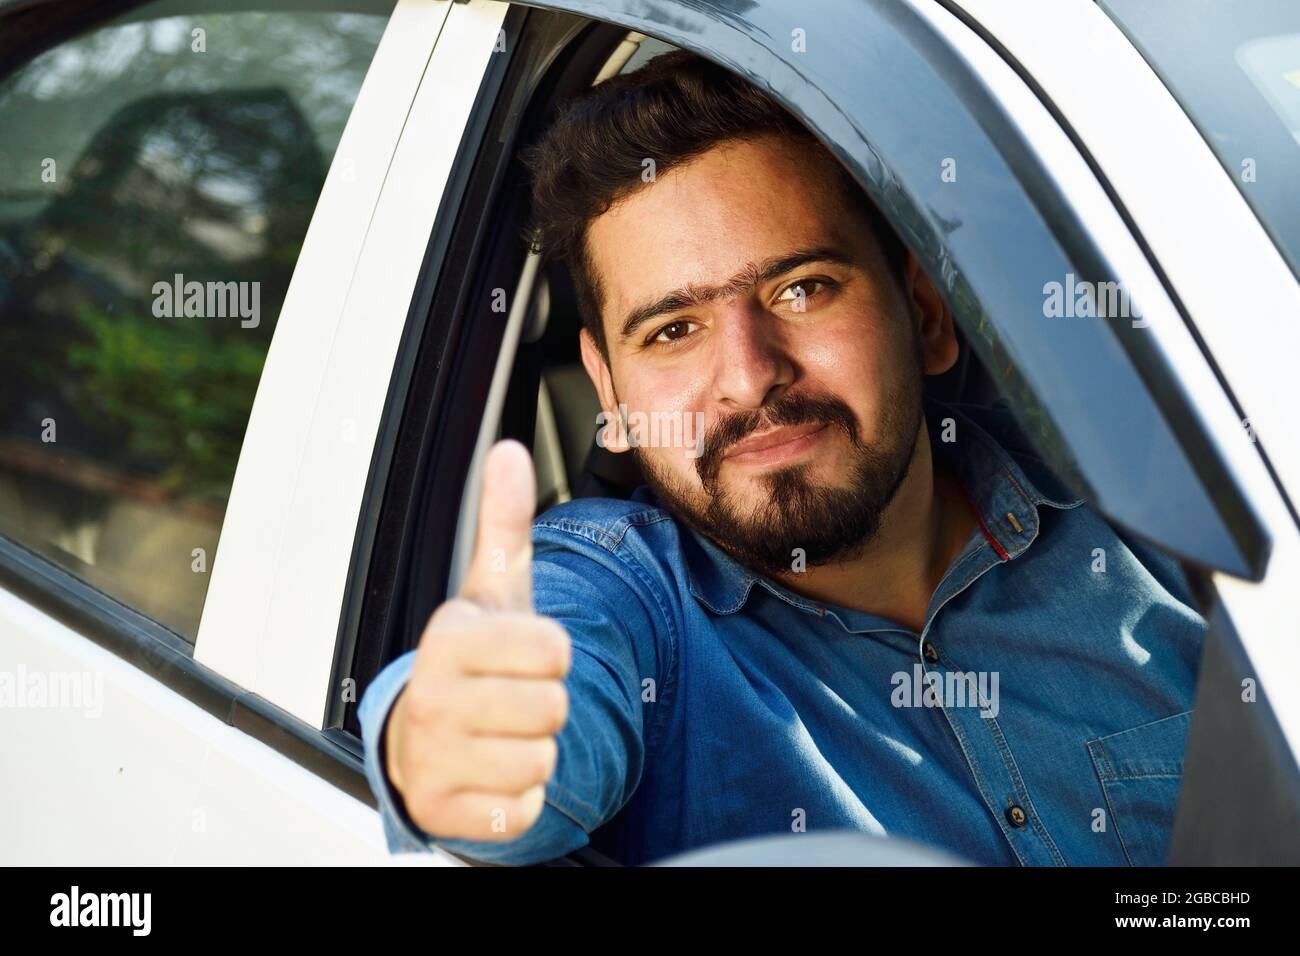 Indian car drive showing thumps up form car's open window Stock Photo